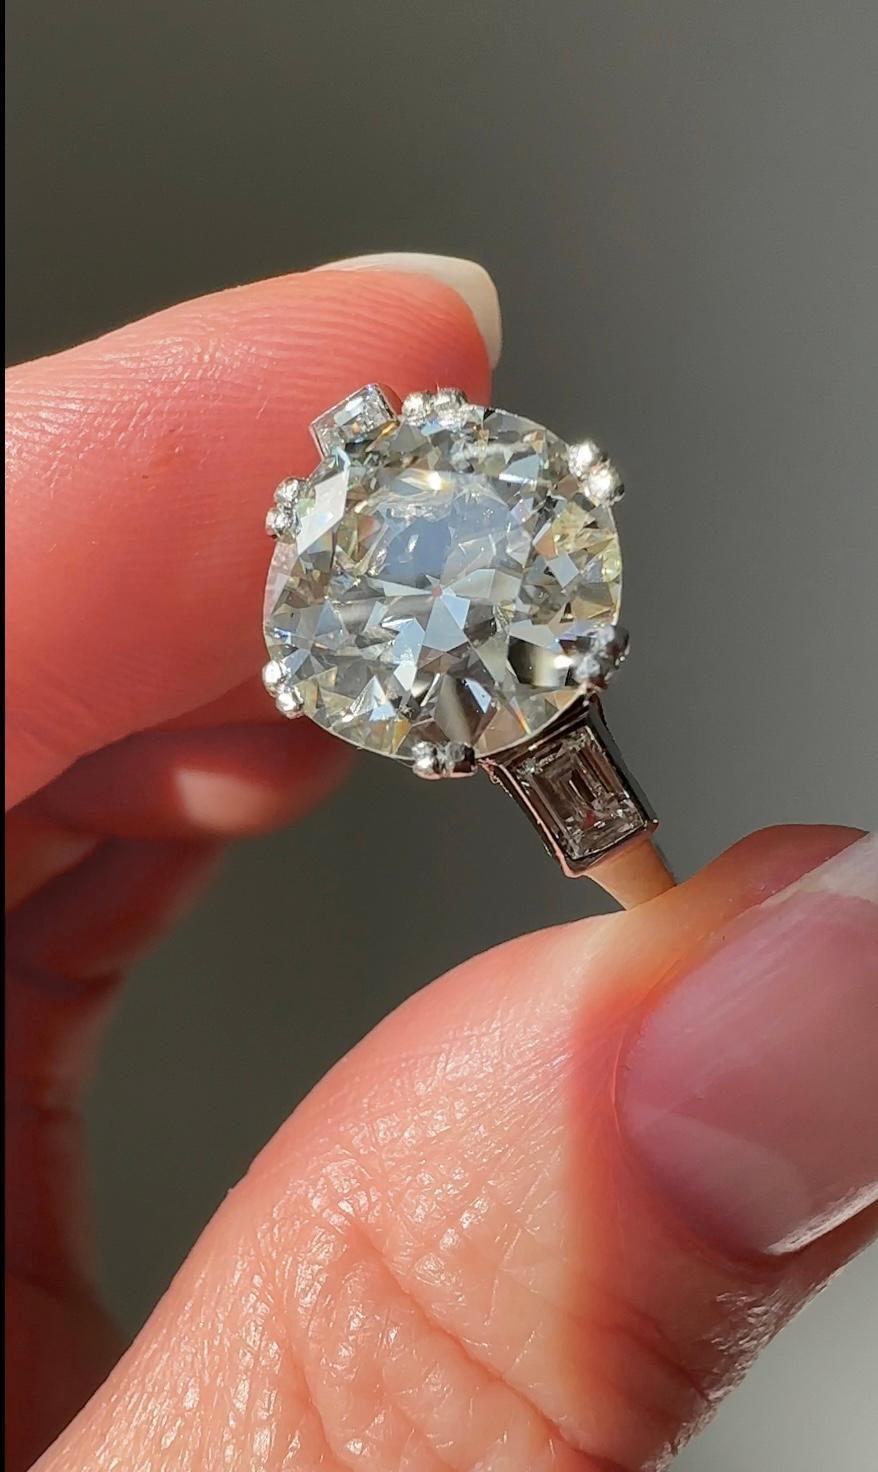 This exceptionally lovely vintage ring centers on a scintillating 4.37 carat European-cut diamond (accompanied by an HRD Antwerp certificate stating SI2 clarity with K color) that beams from between a pair of mirror-like baguette diamonds. The